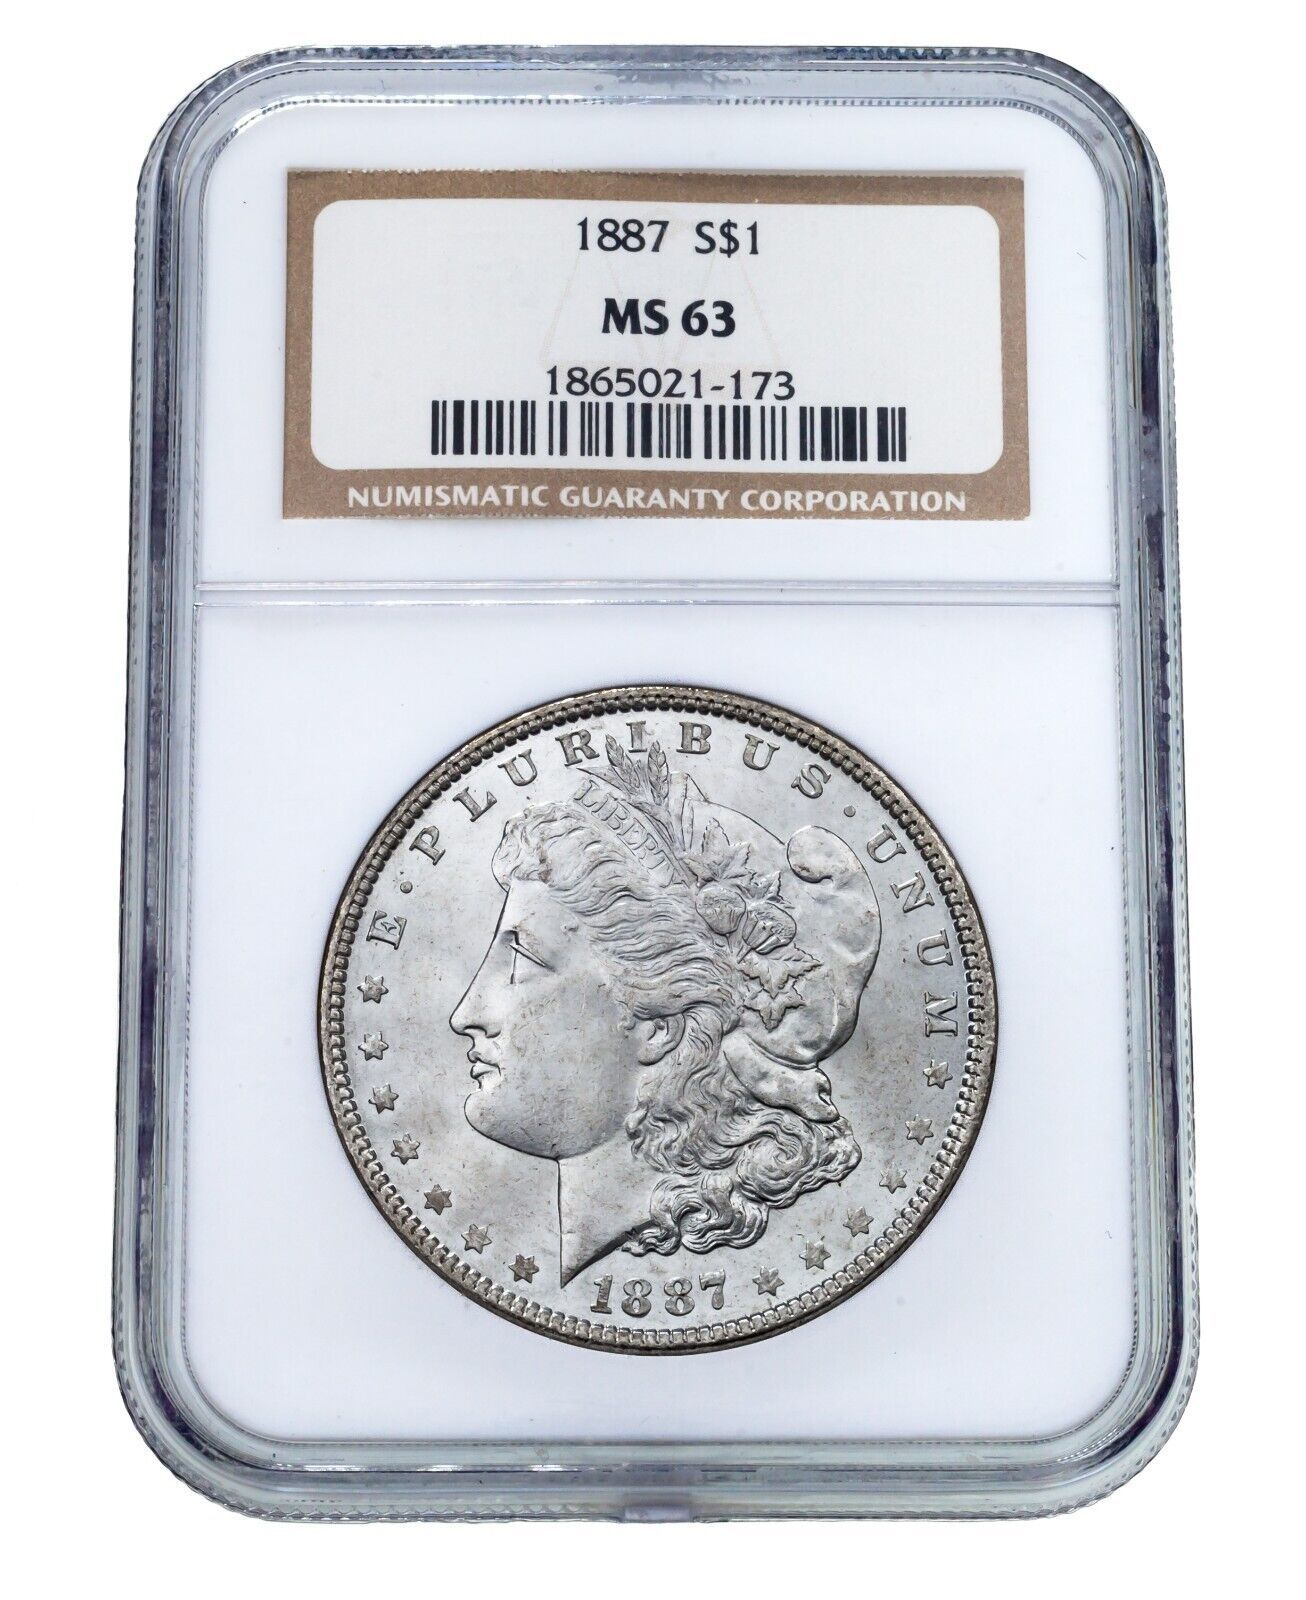 Primary image for 1887 $1 Silver Morgan Dollar Graded by NGC as MS-63